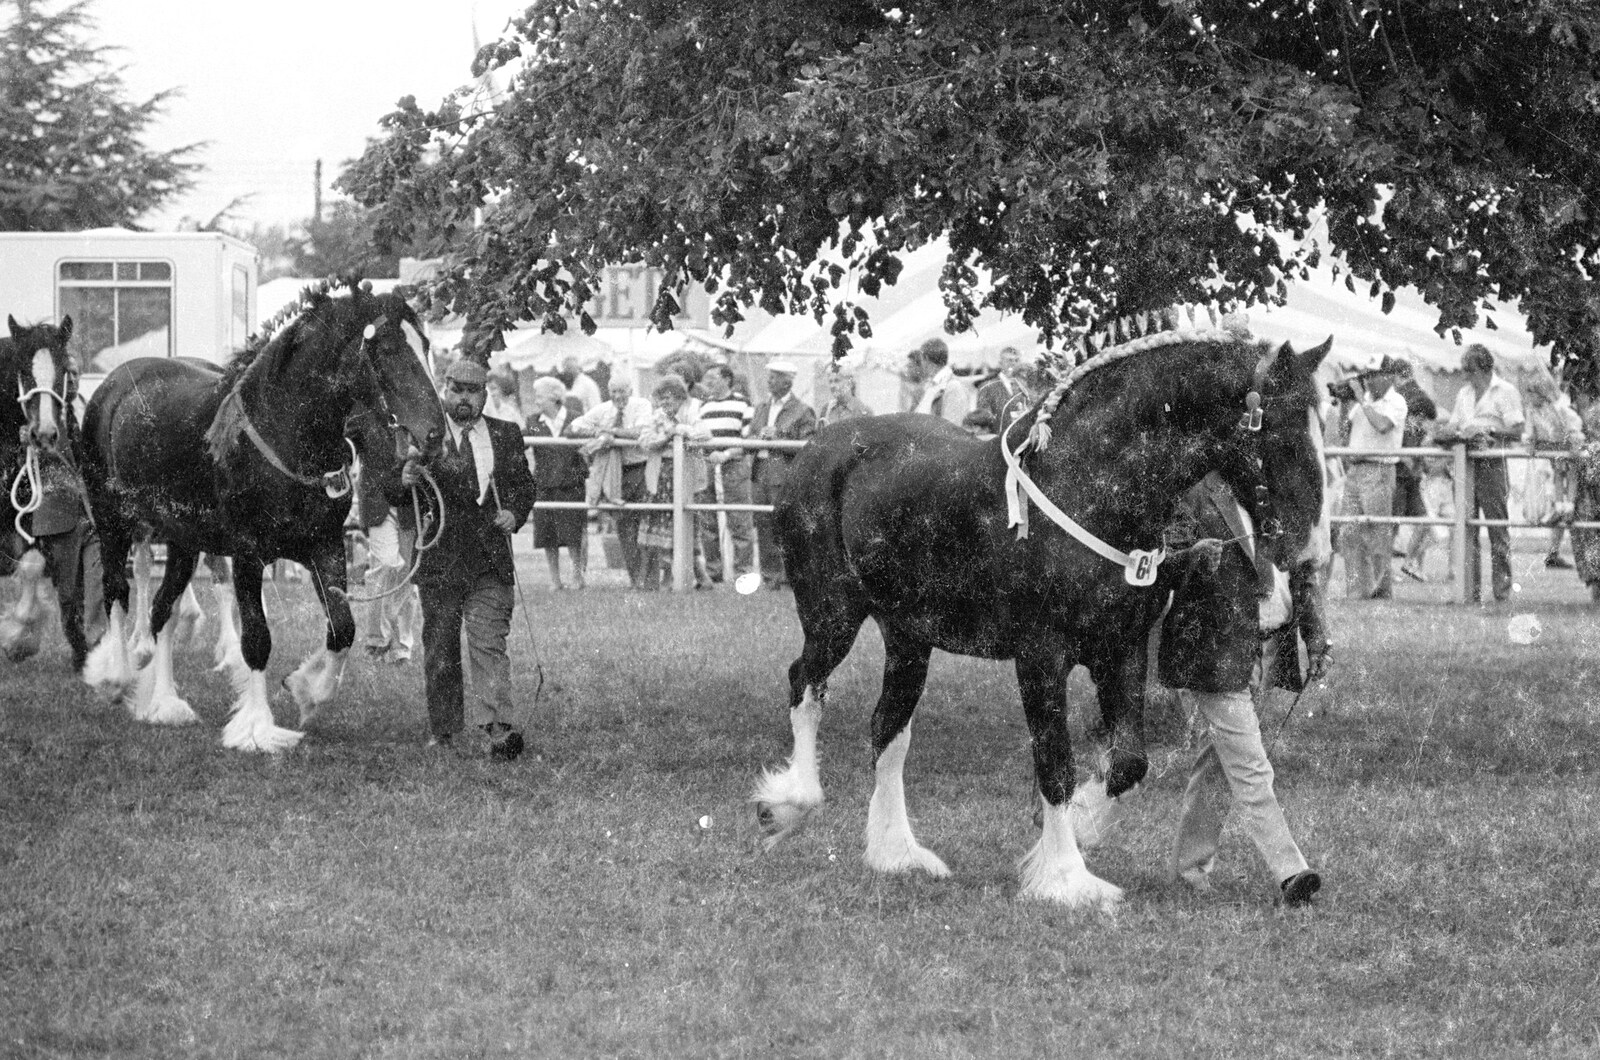 A pair of fancy heavy horses from The Royal Norfolk Show, Costessey Showground, Norwich - June 20th 1994